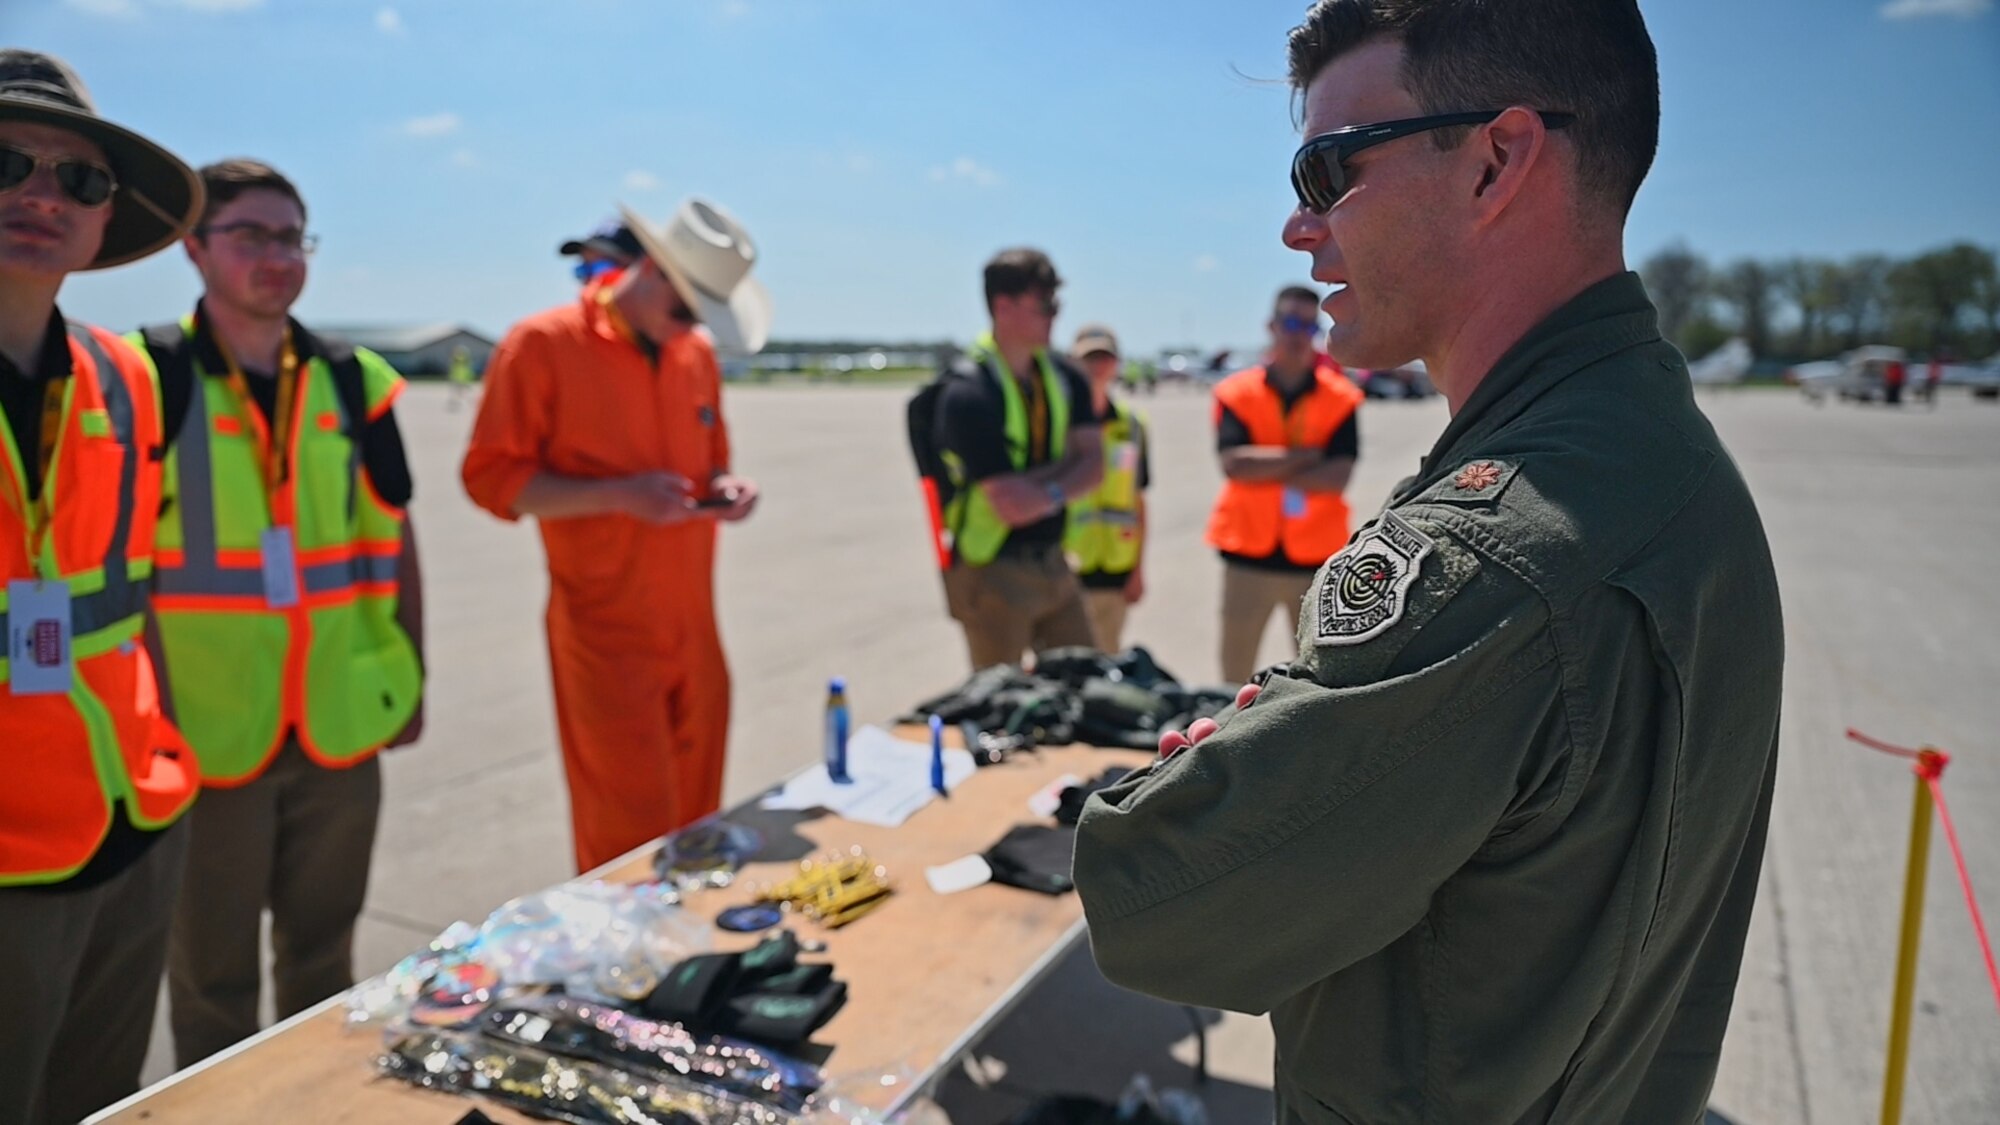 SAFECON brings the top three collegiate aviation teams from 10 regions across the United States to compete head-to-head while also offering opportunities for participants to network and engage with commercial and military aviation supporters and sponsors.